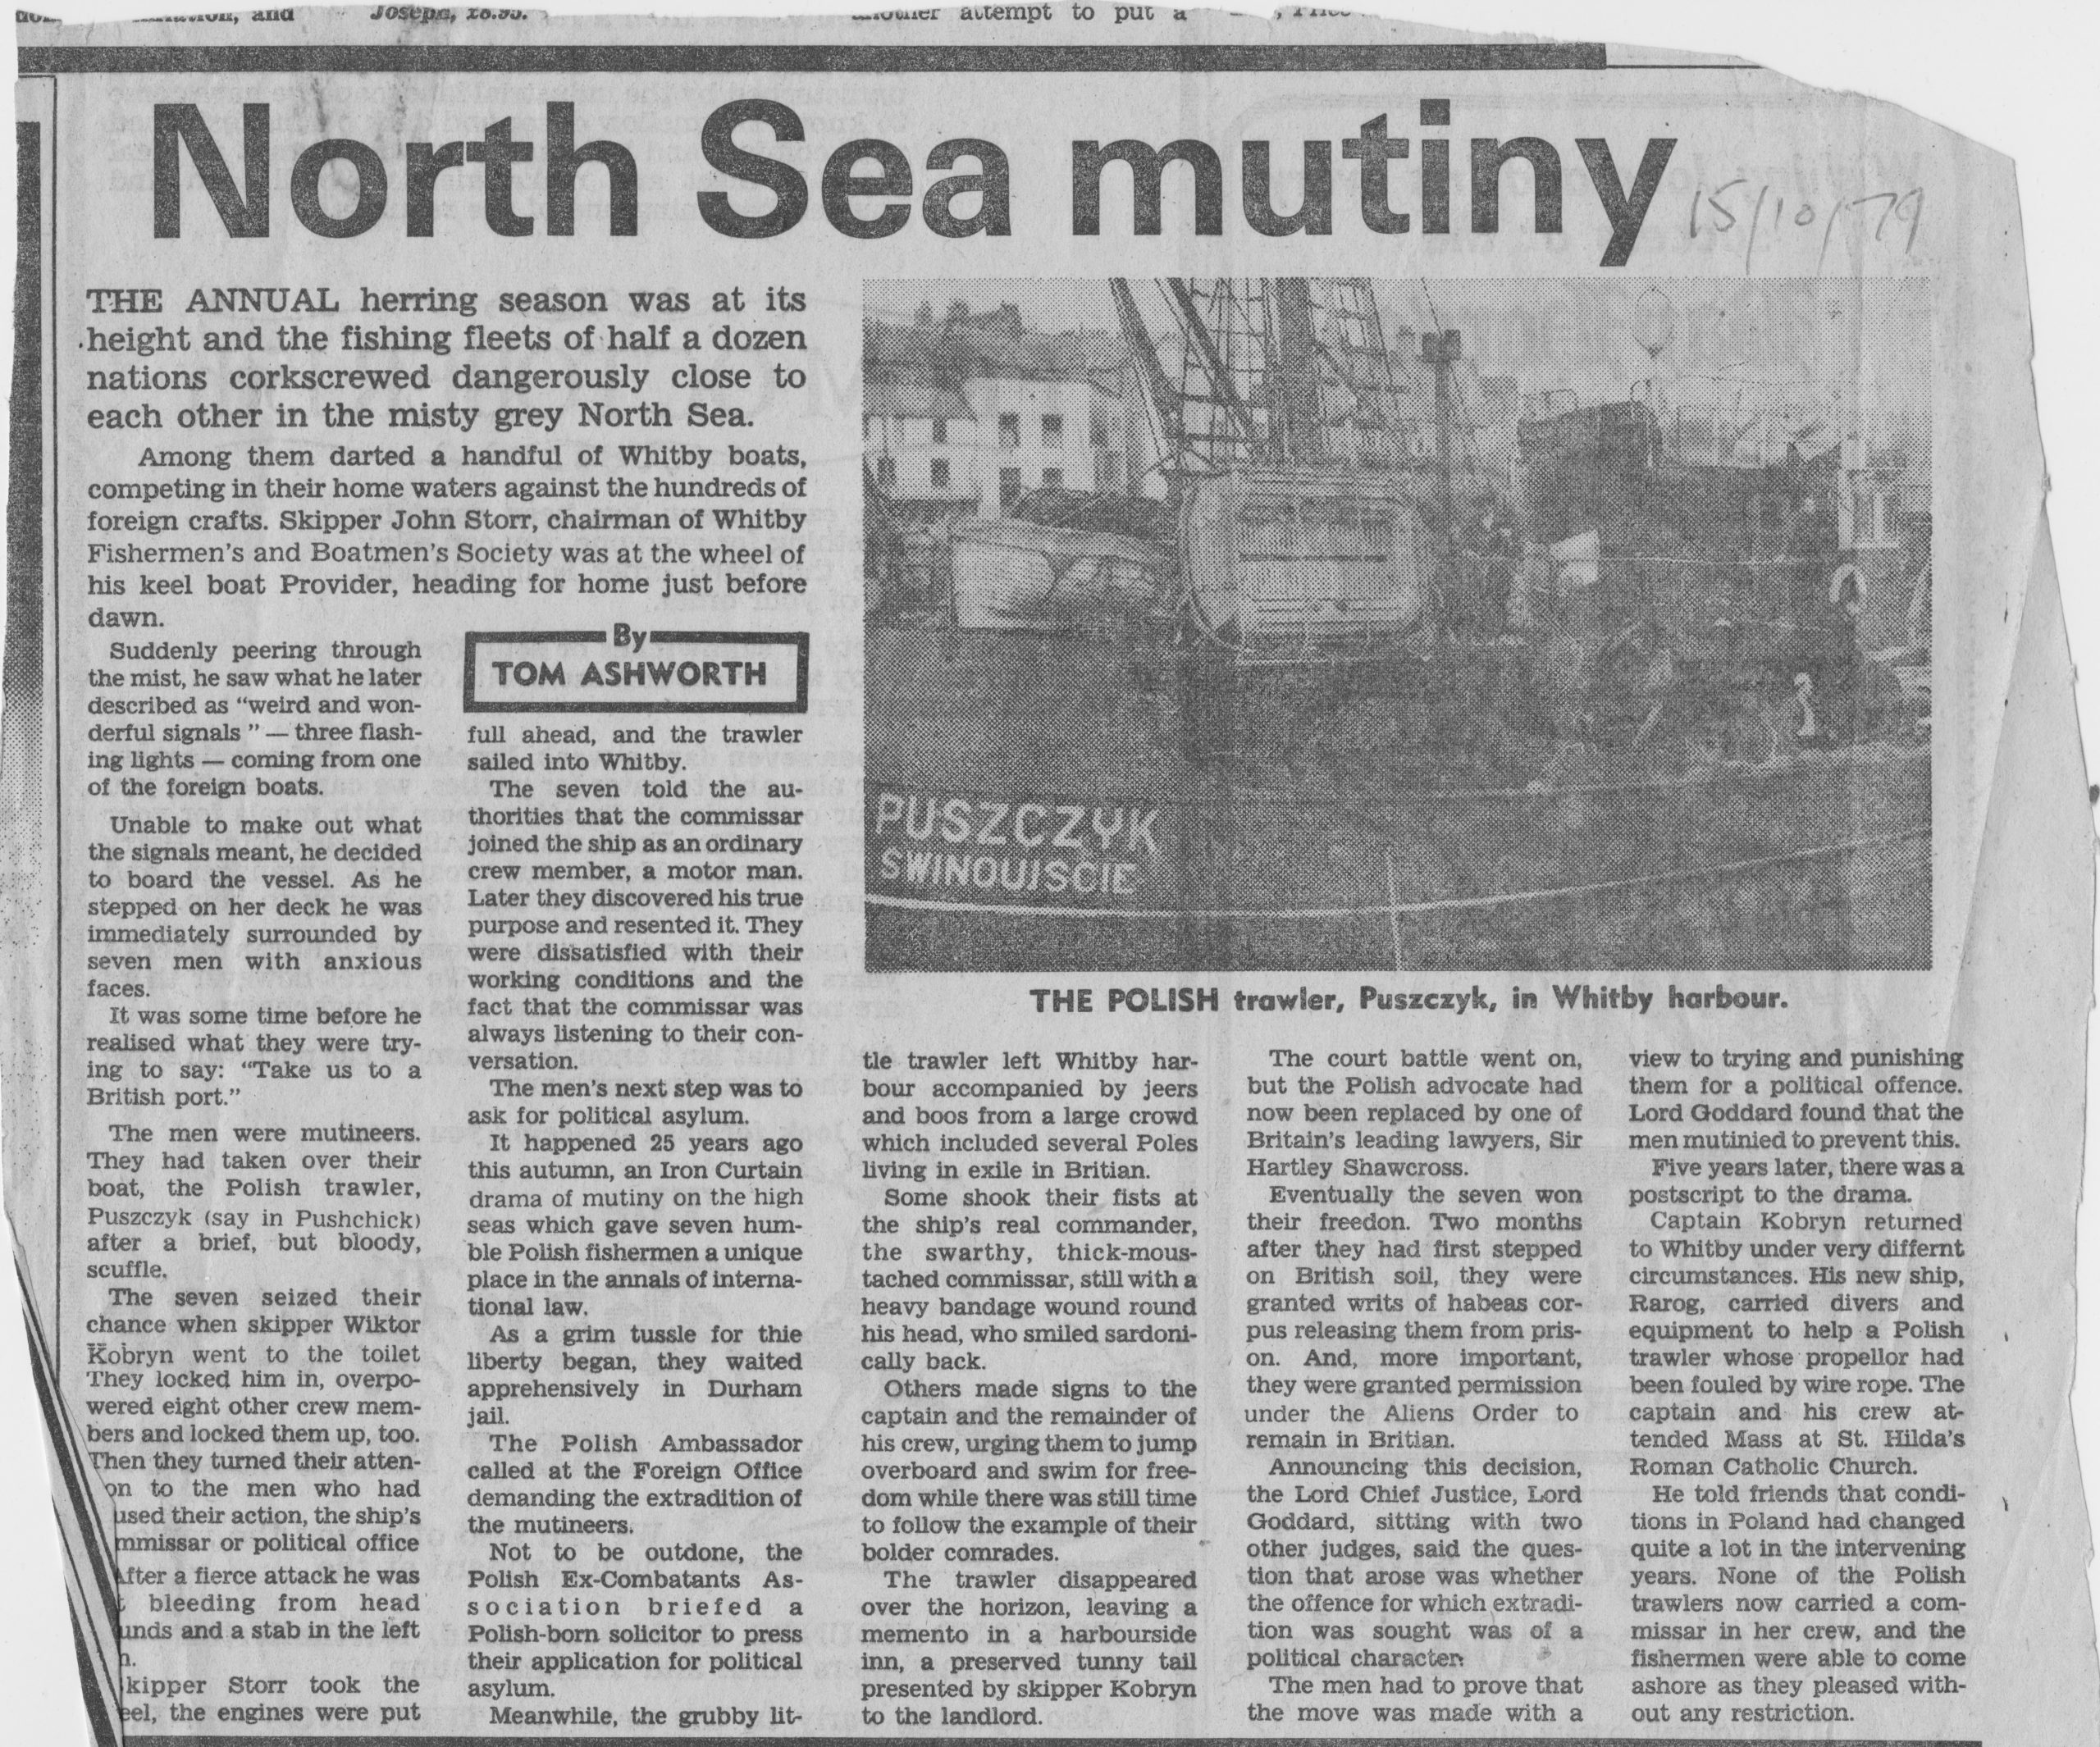 Feature about the mutiny by Polish fishermen 25 years ago